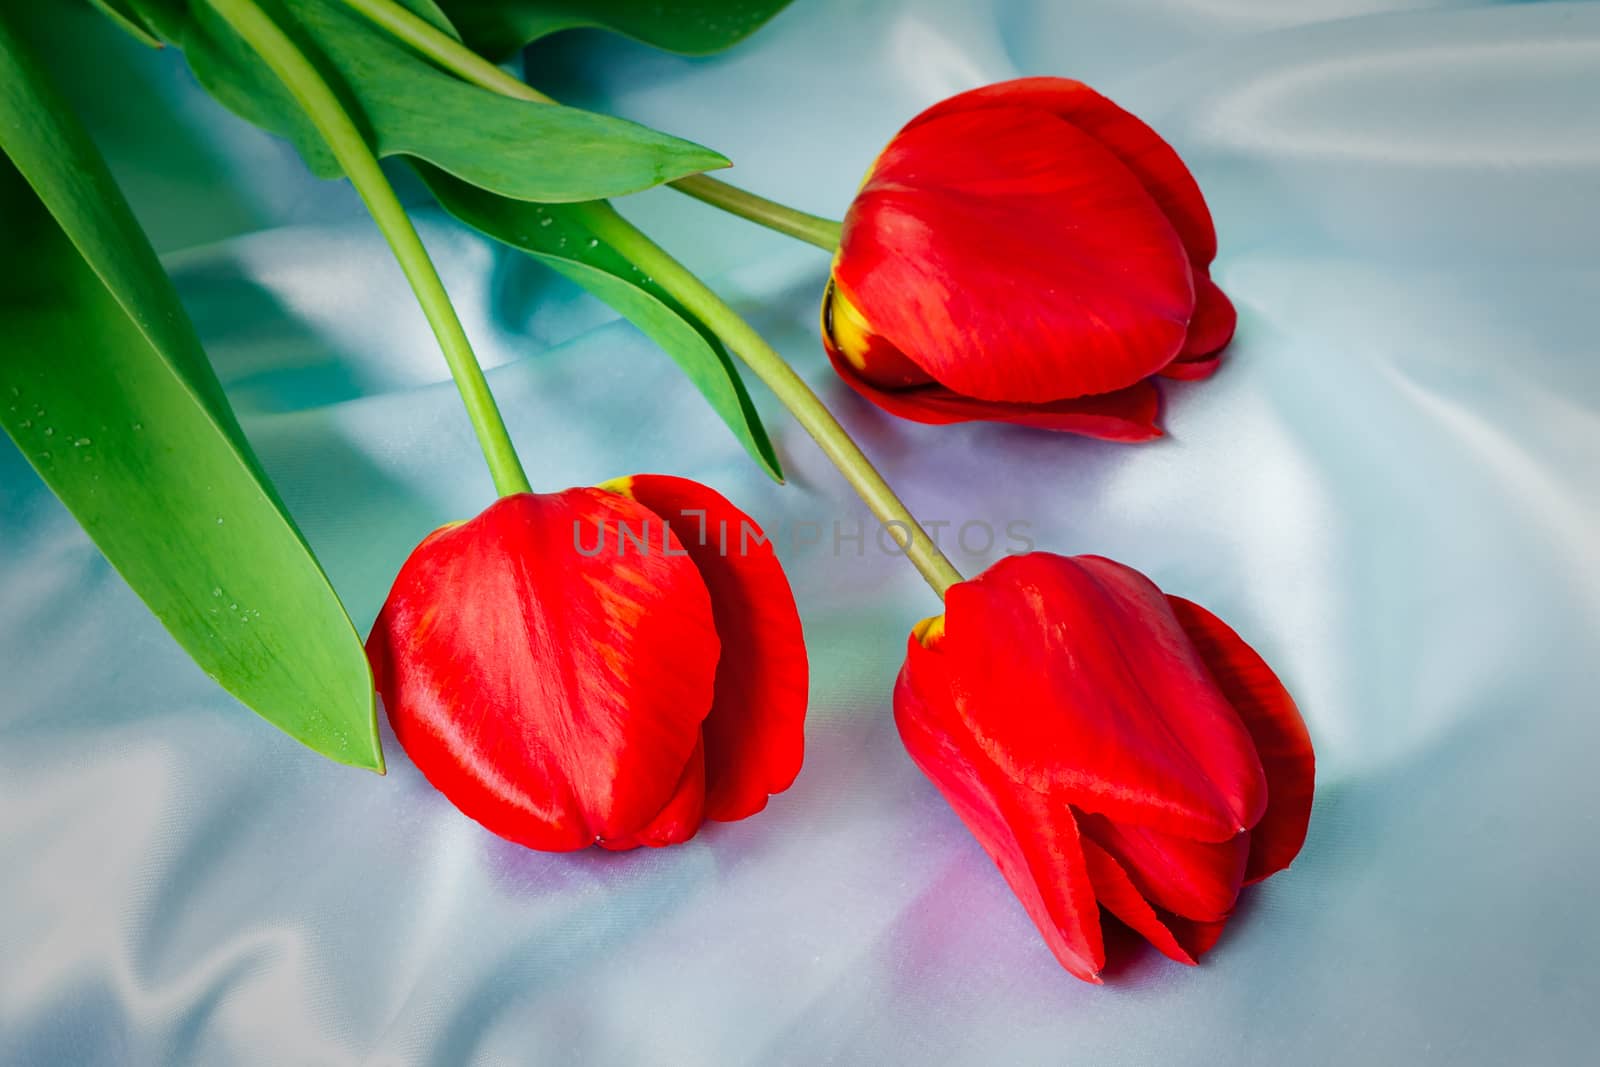 Three big beautiful tulips of bright red color with green leaves against blue silk